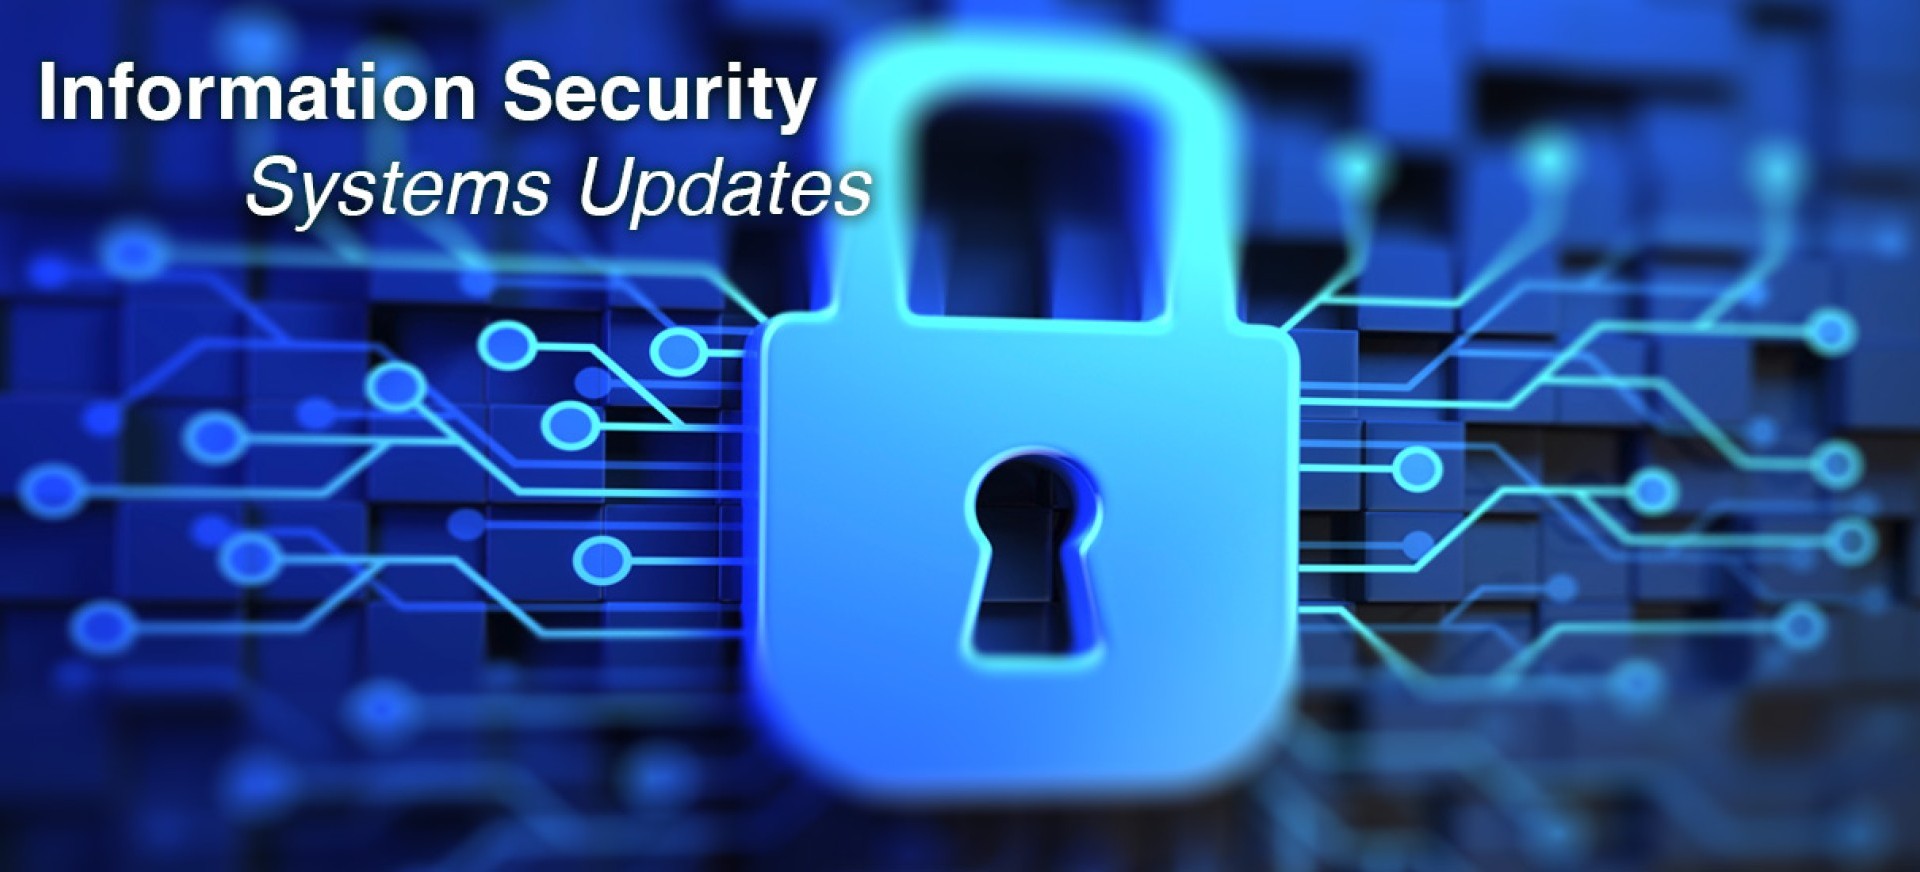 Information Security Systems Updates